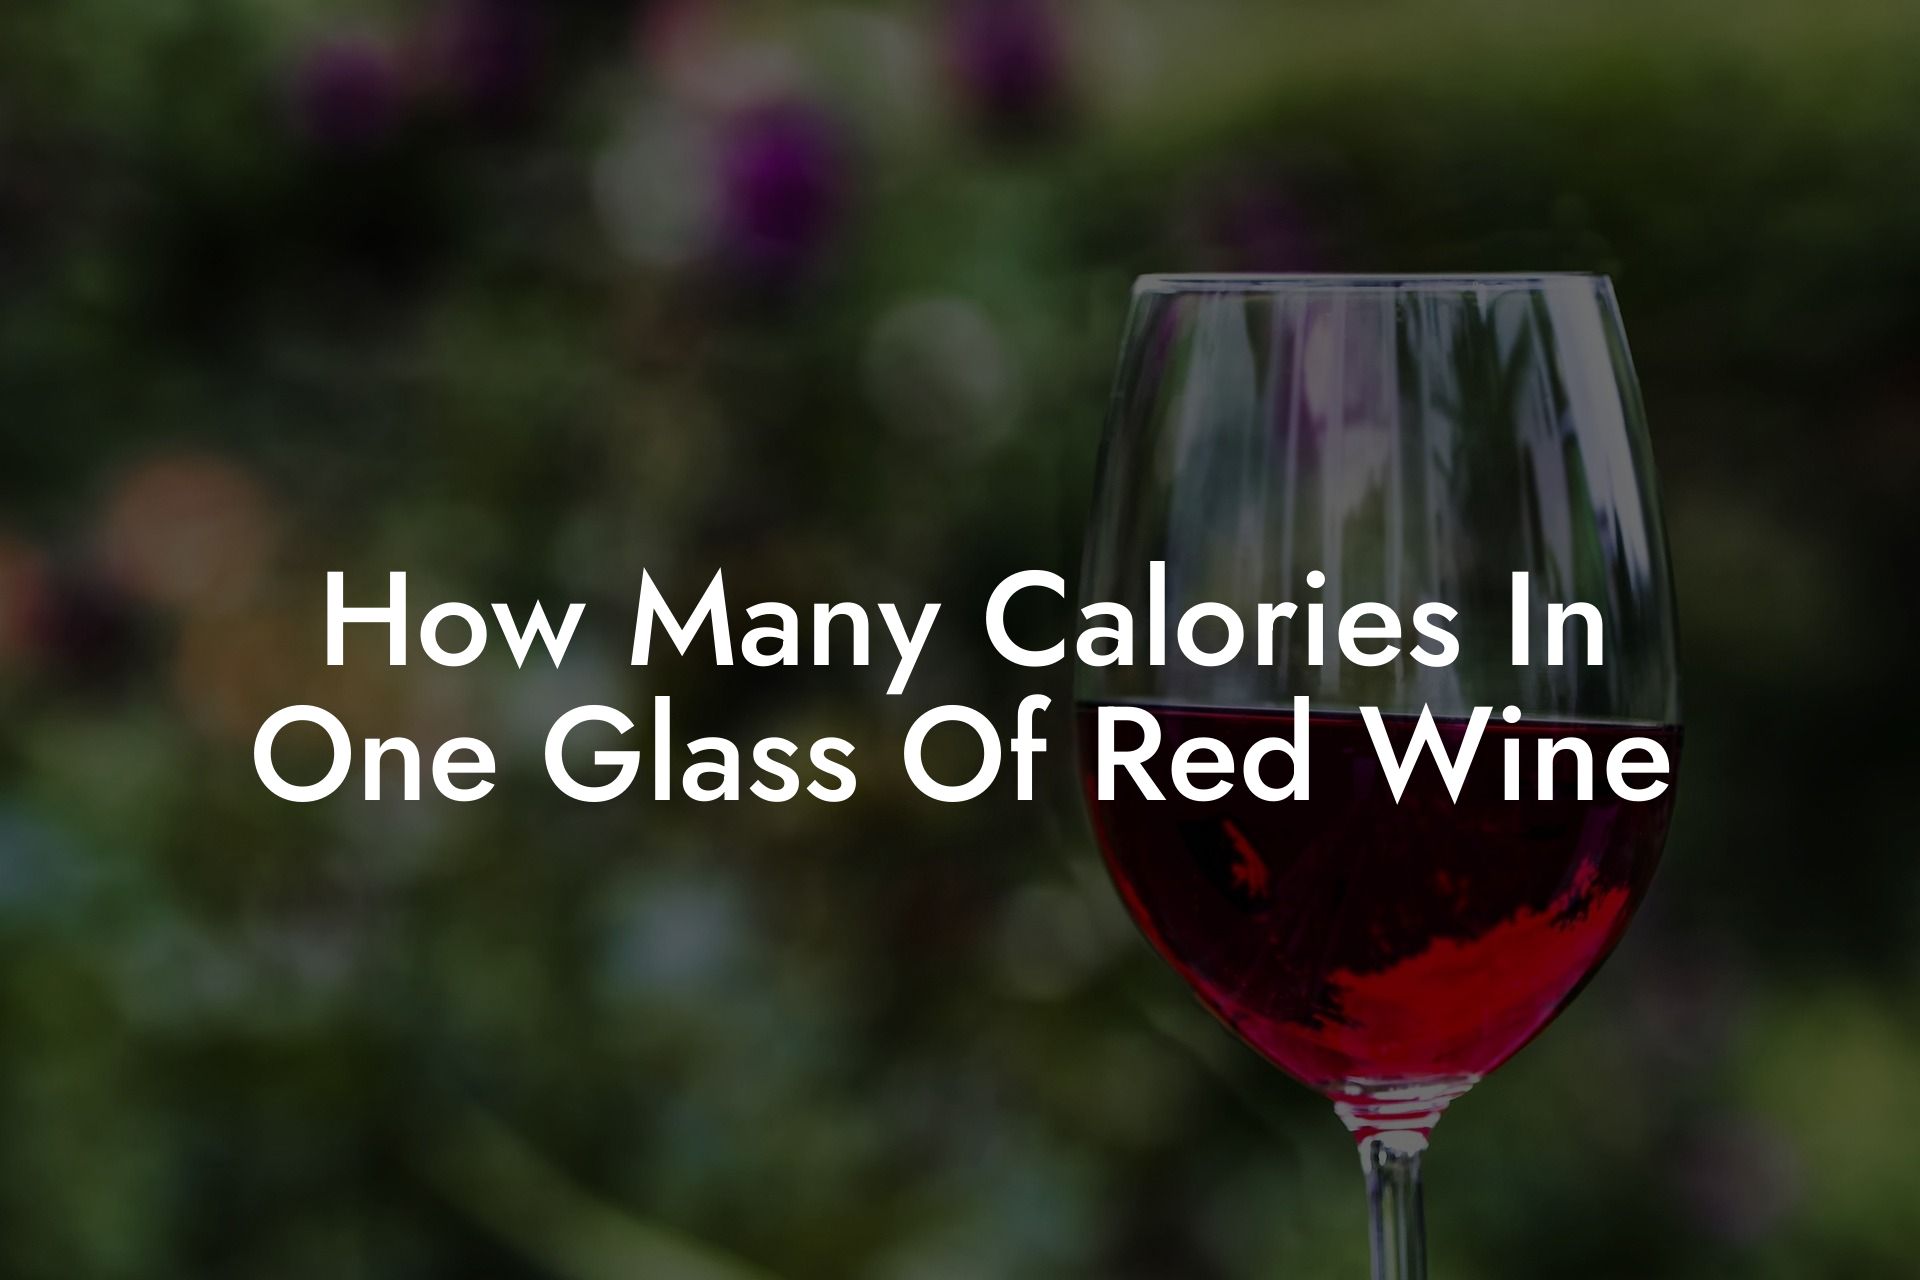 How Many Calories In One Glass Of Red Wine